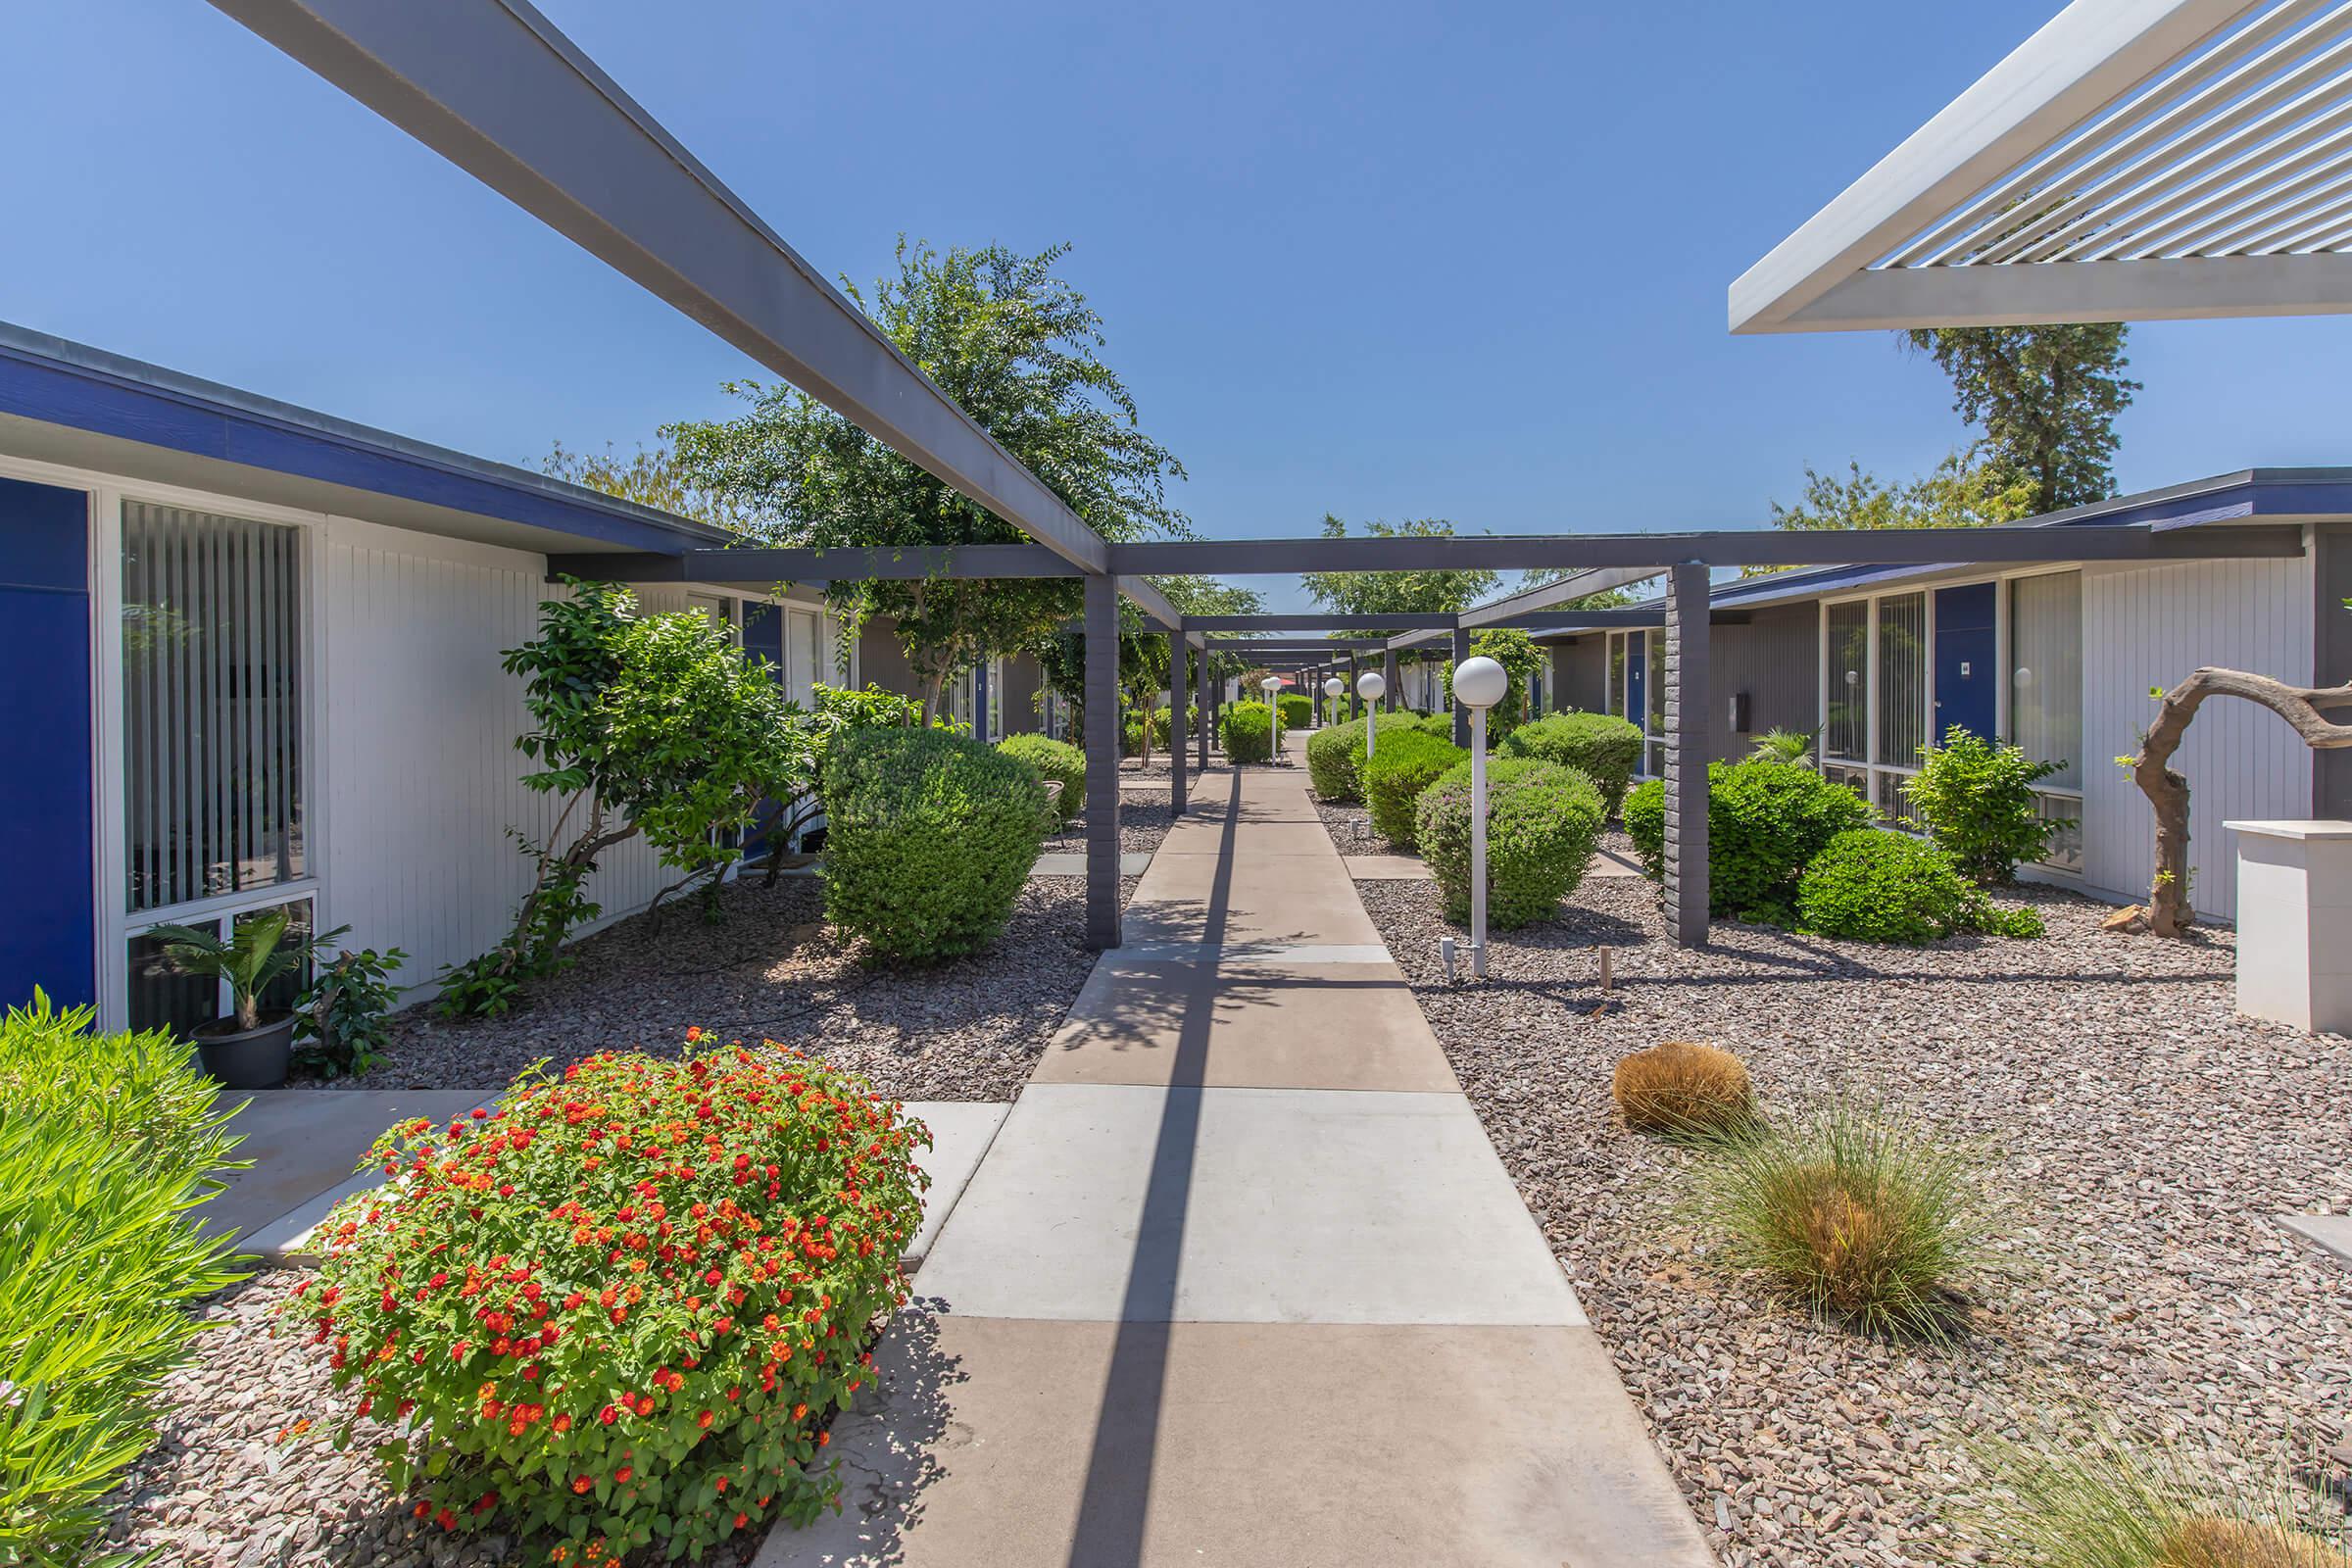 Outdoor walkway surrounded by green landscaping and Phoenix apartments on either side